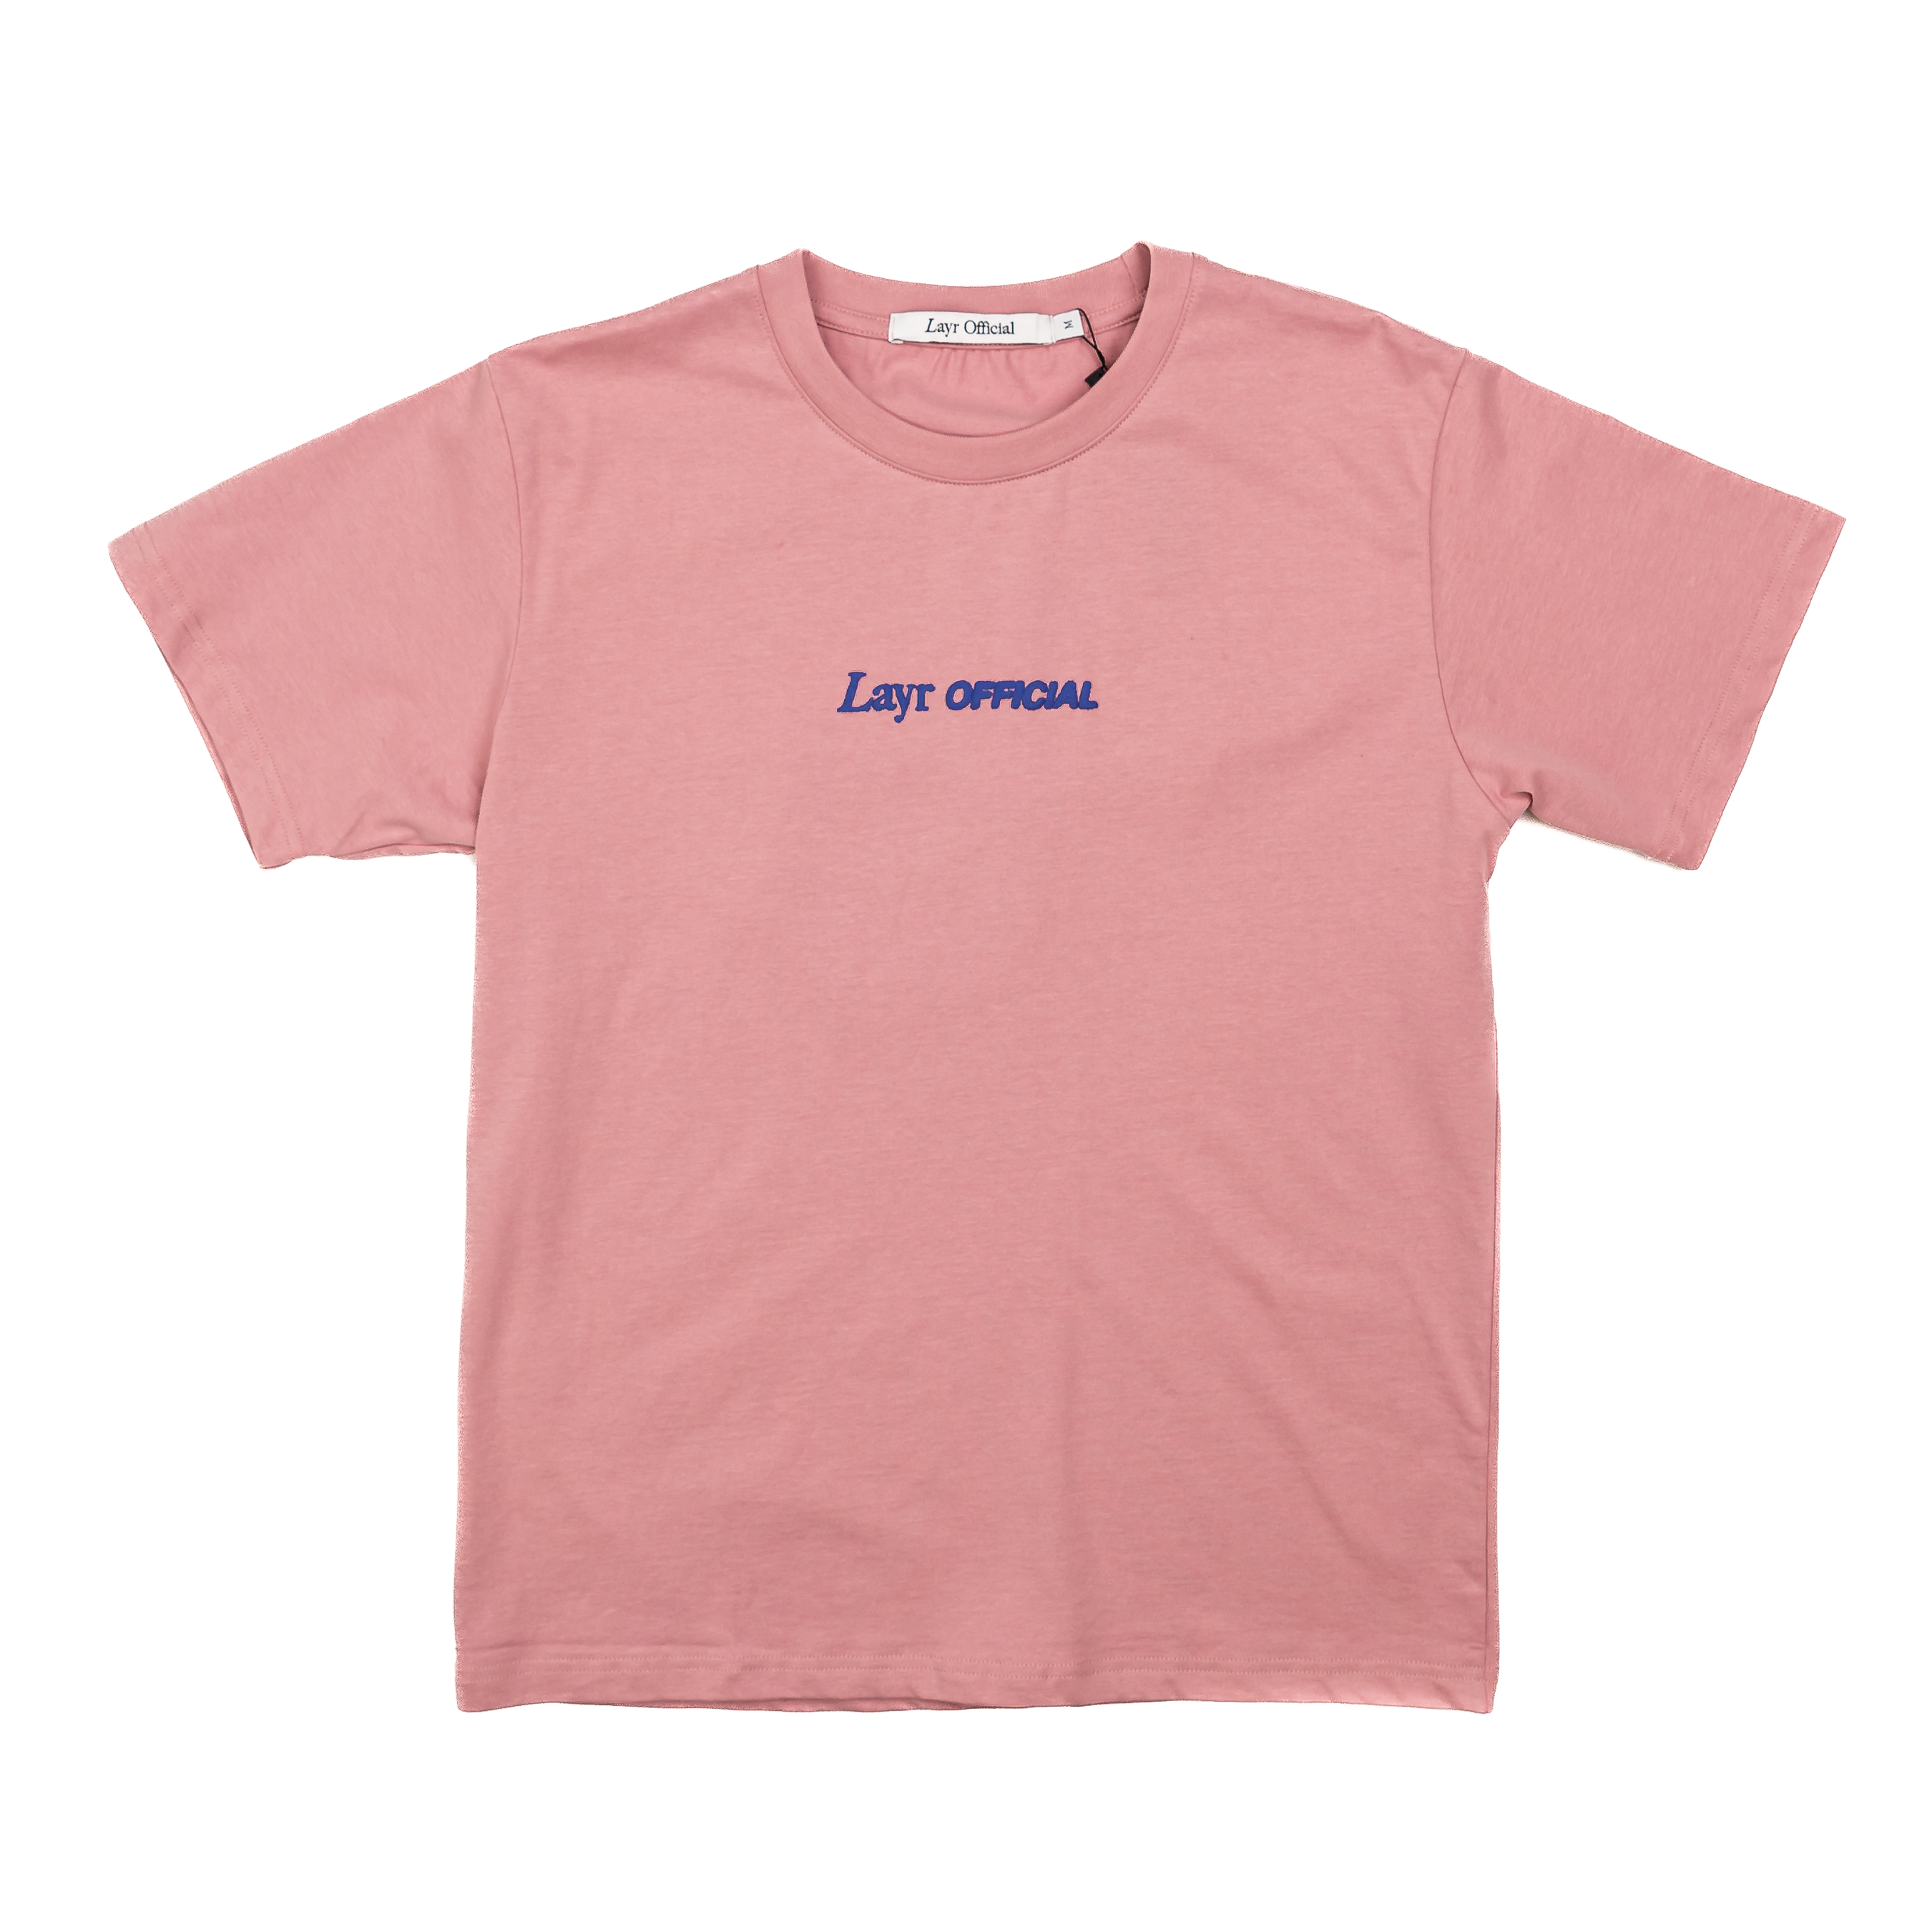 Official – Layr Tee, Puff New LO Washed Pink